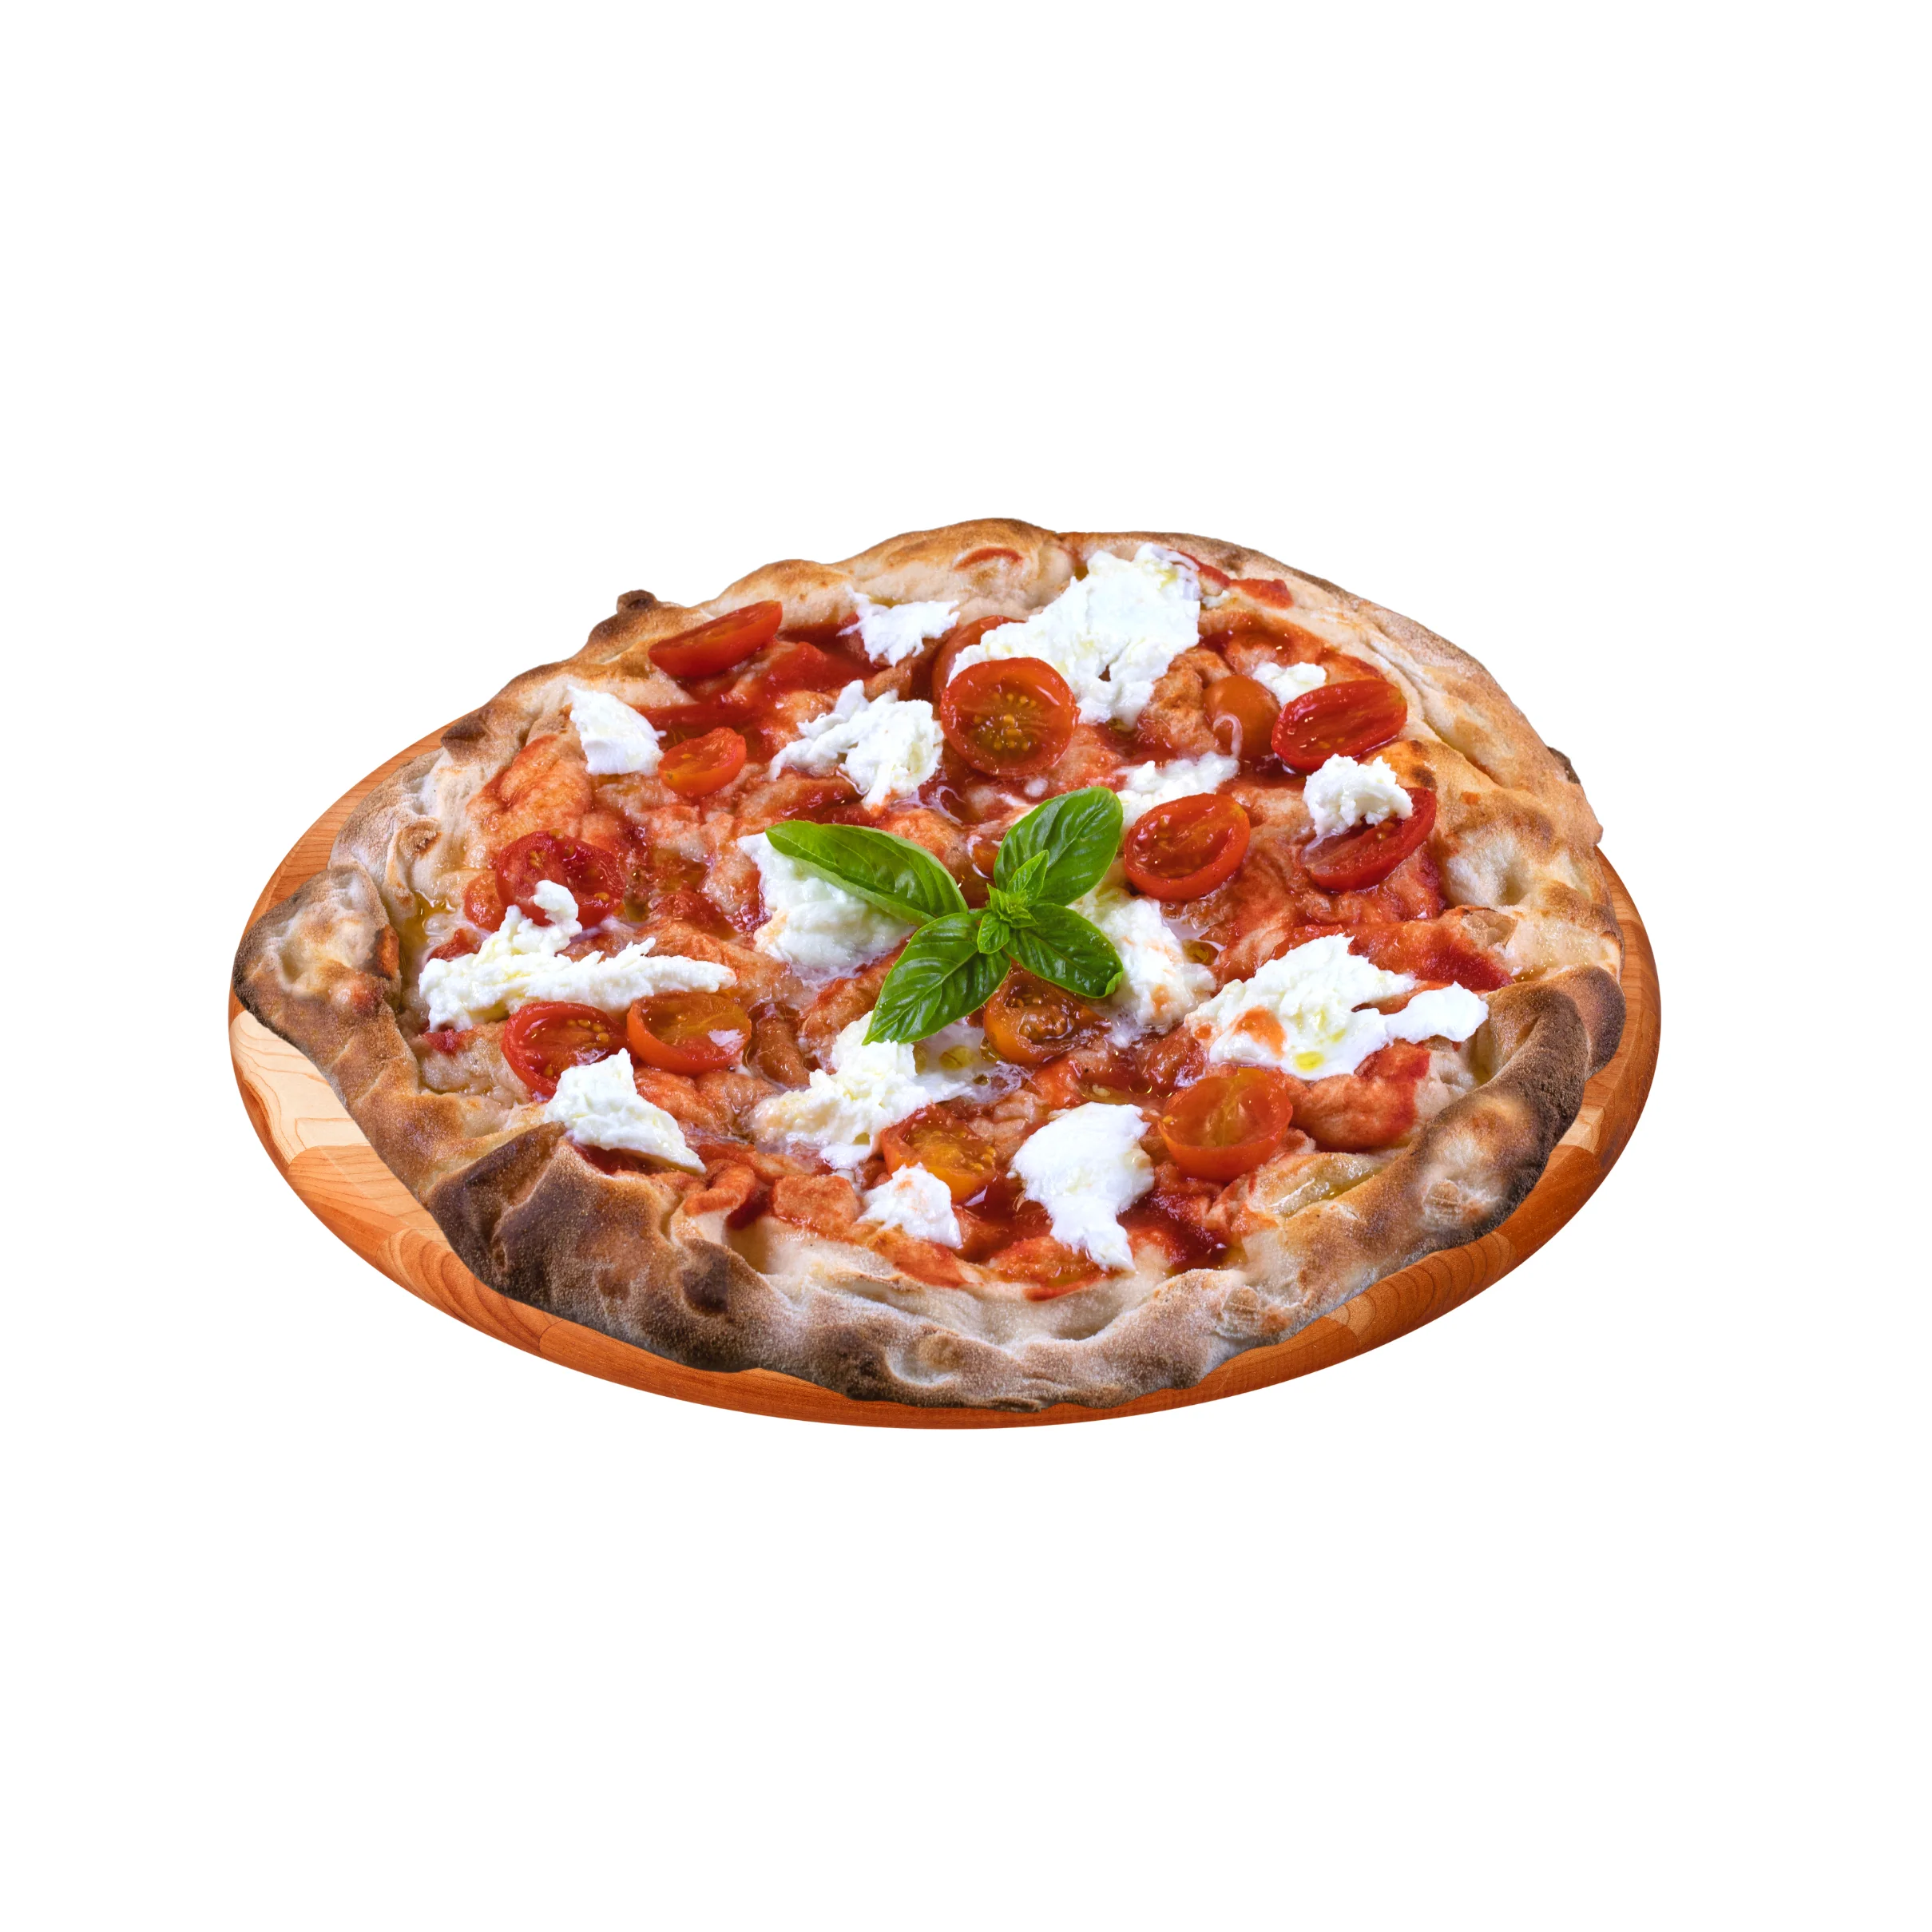 Precooked baked gluten-free round base 30 cm 235 gr high quality Italian food product to be garnished and baked in the oven